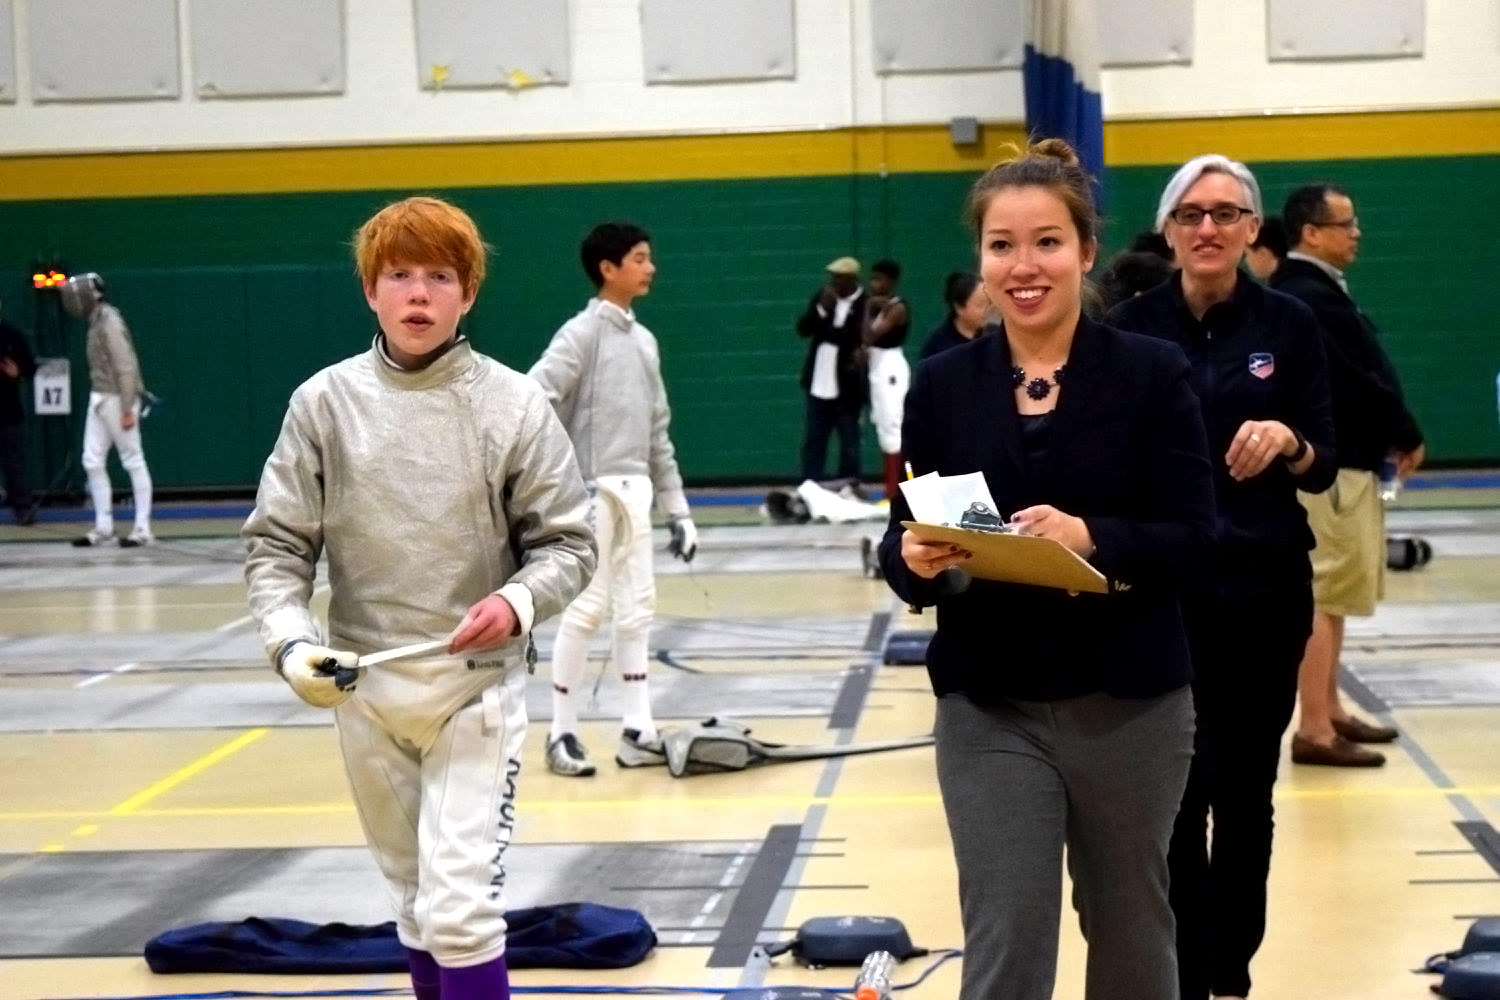 A middle-school crush led Kyono to the sport of fencing. She’s now seeking to become an international-level referee. 